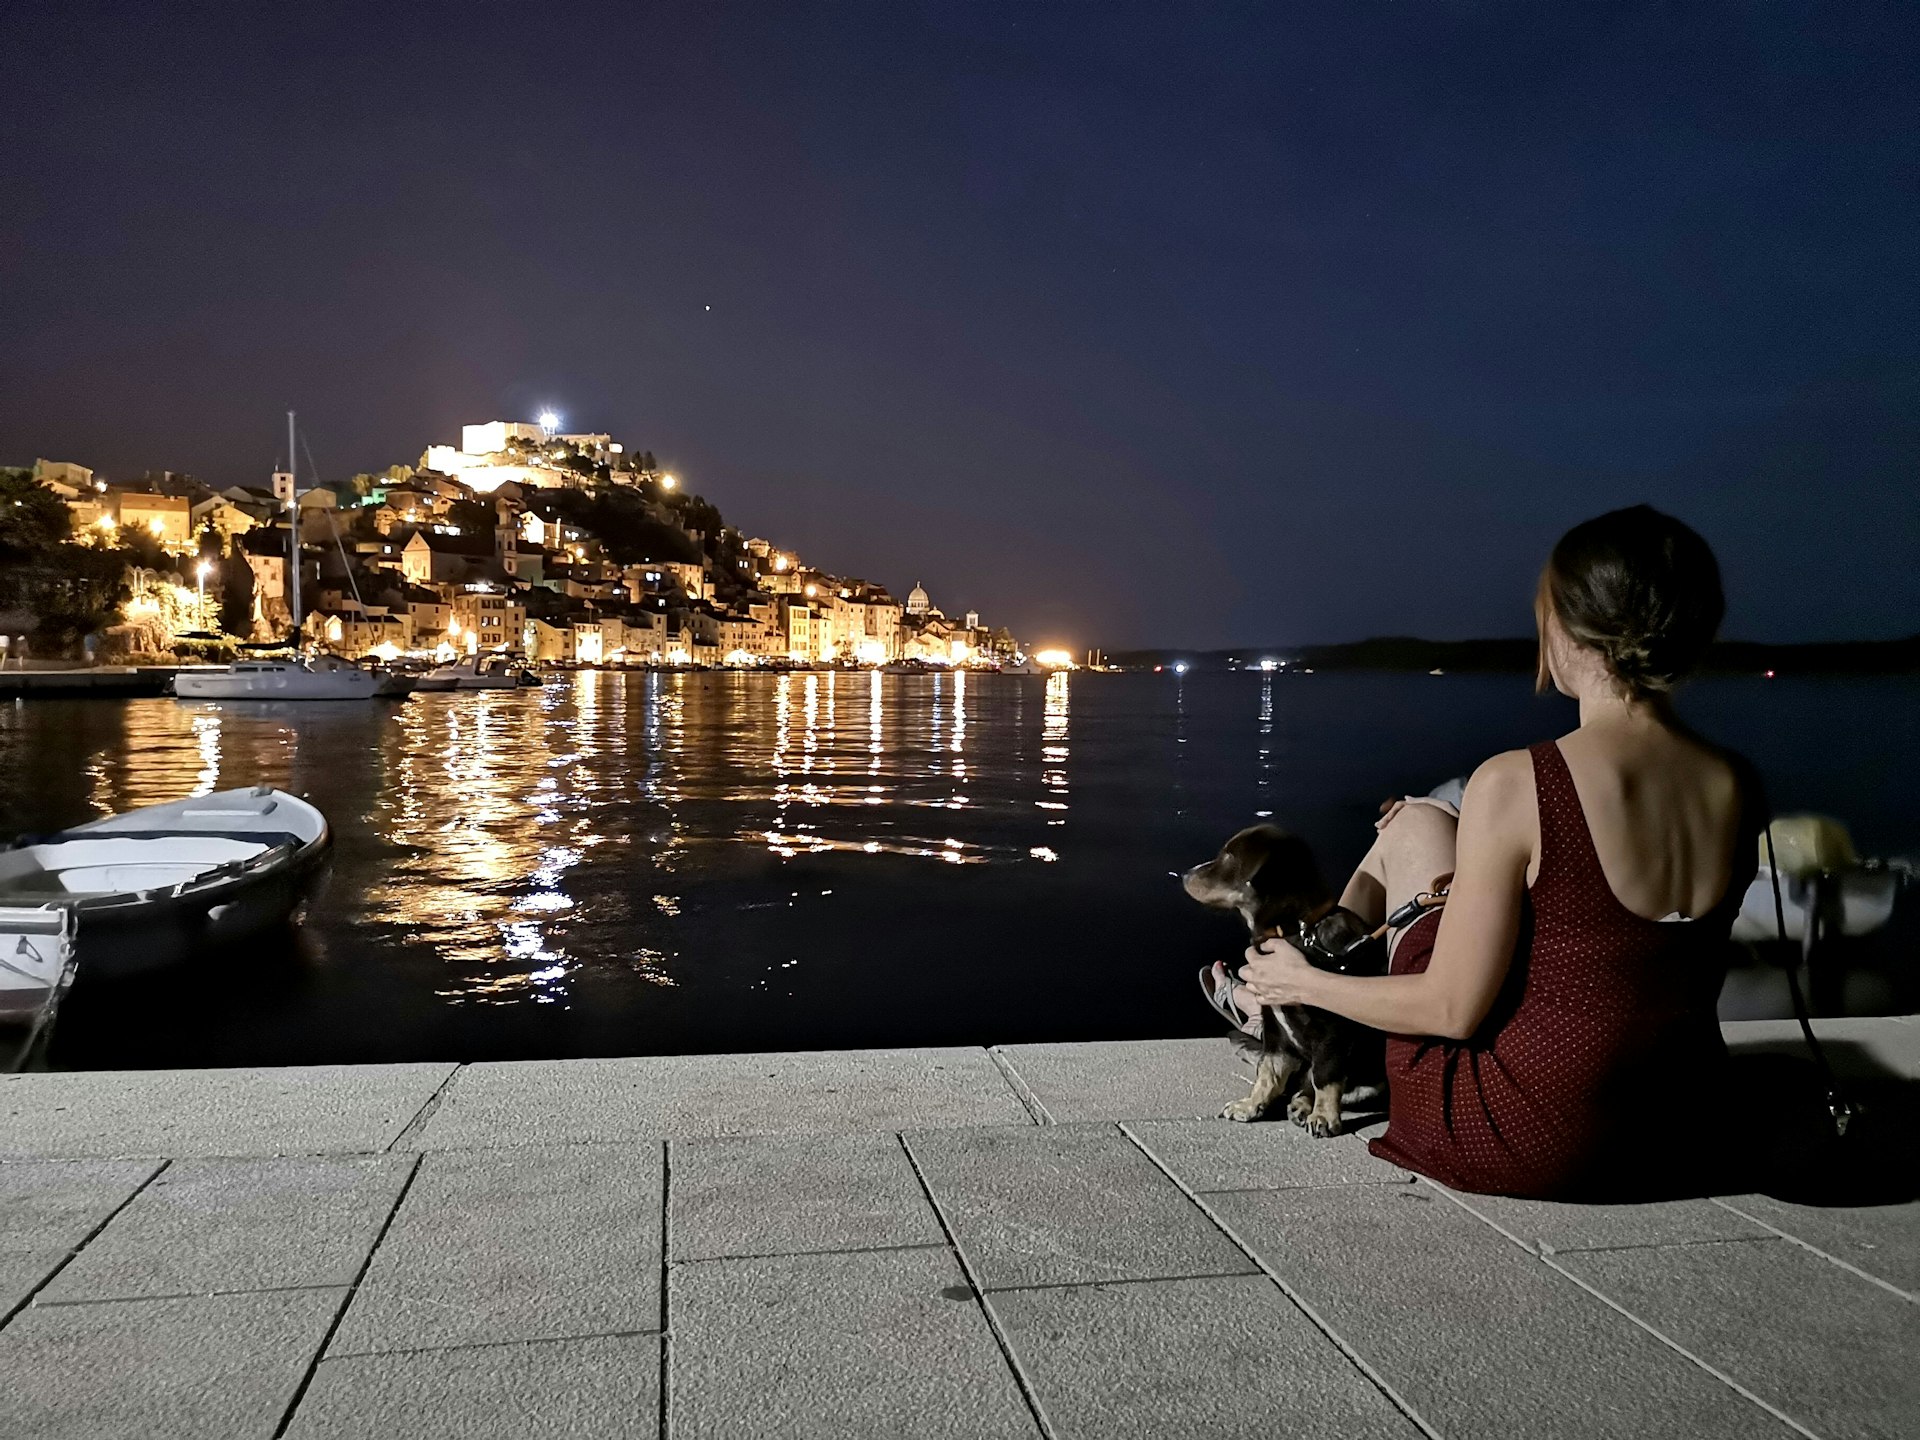 A woman with a dog looks out over the harbor at night at the illuminated town of Šibenik, Croatia